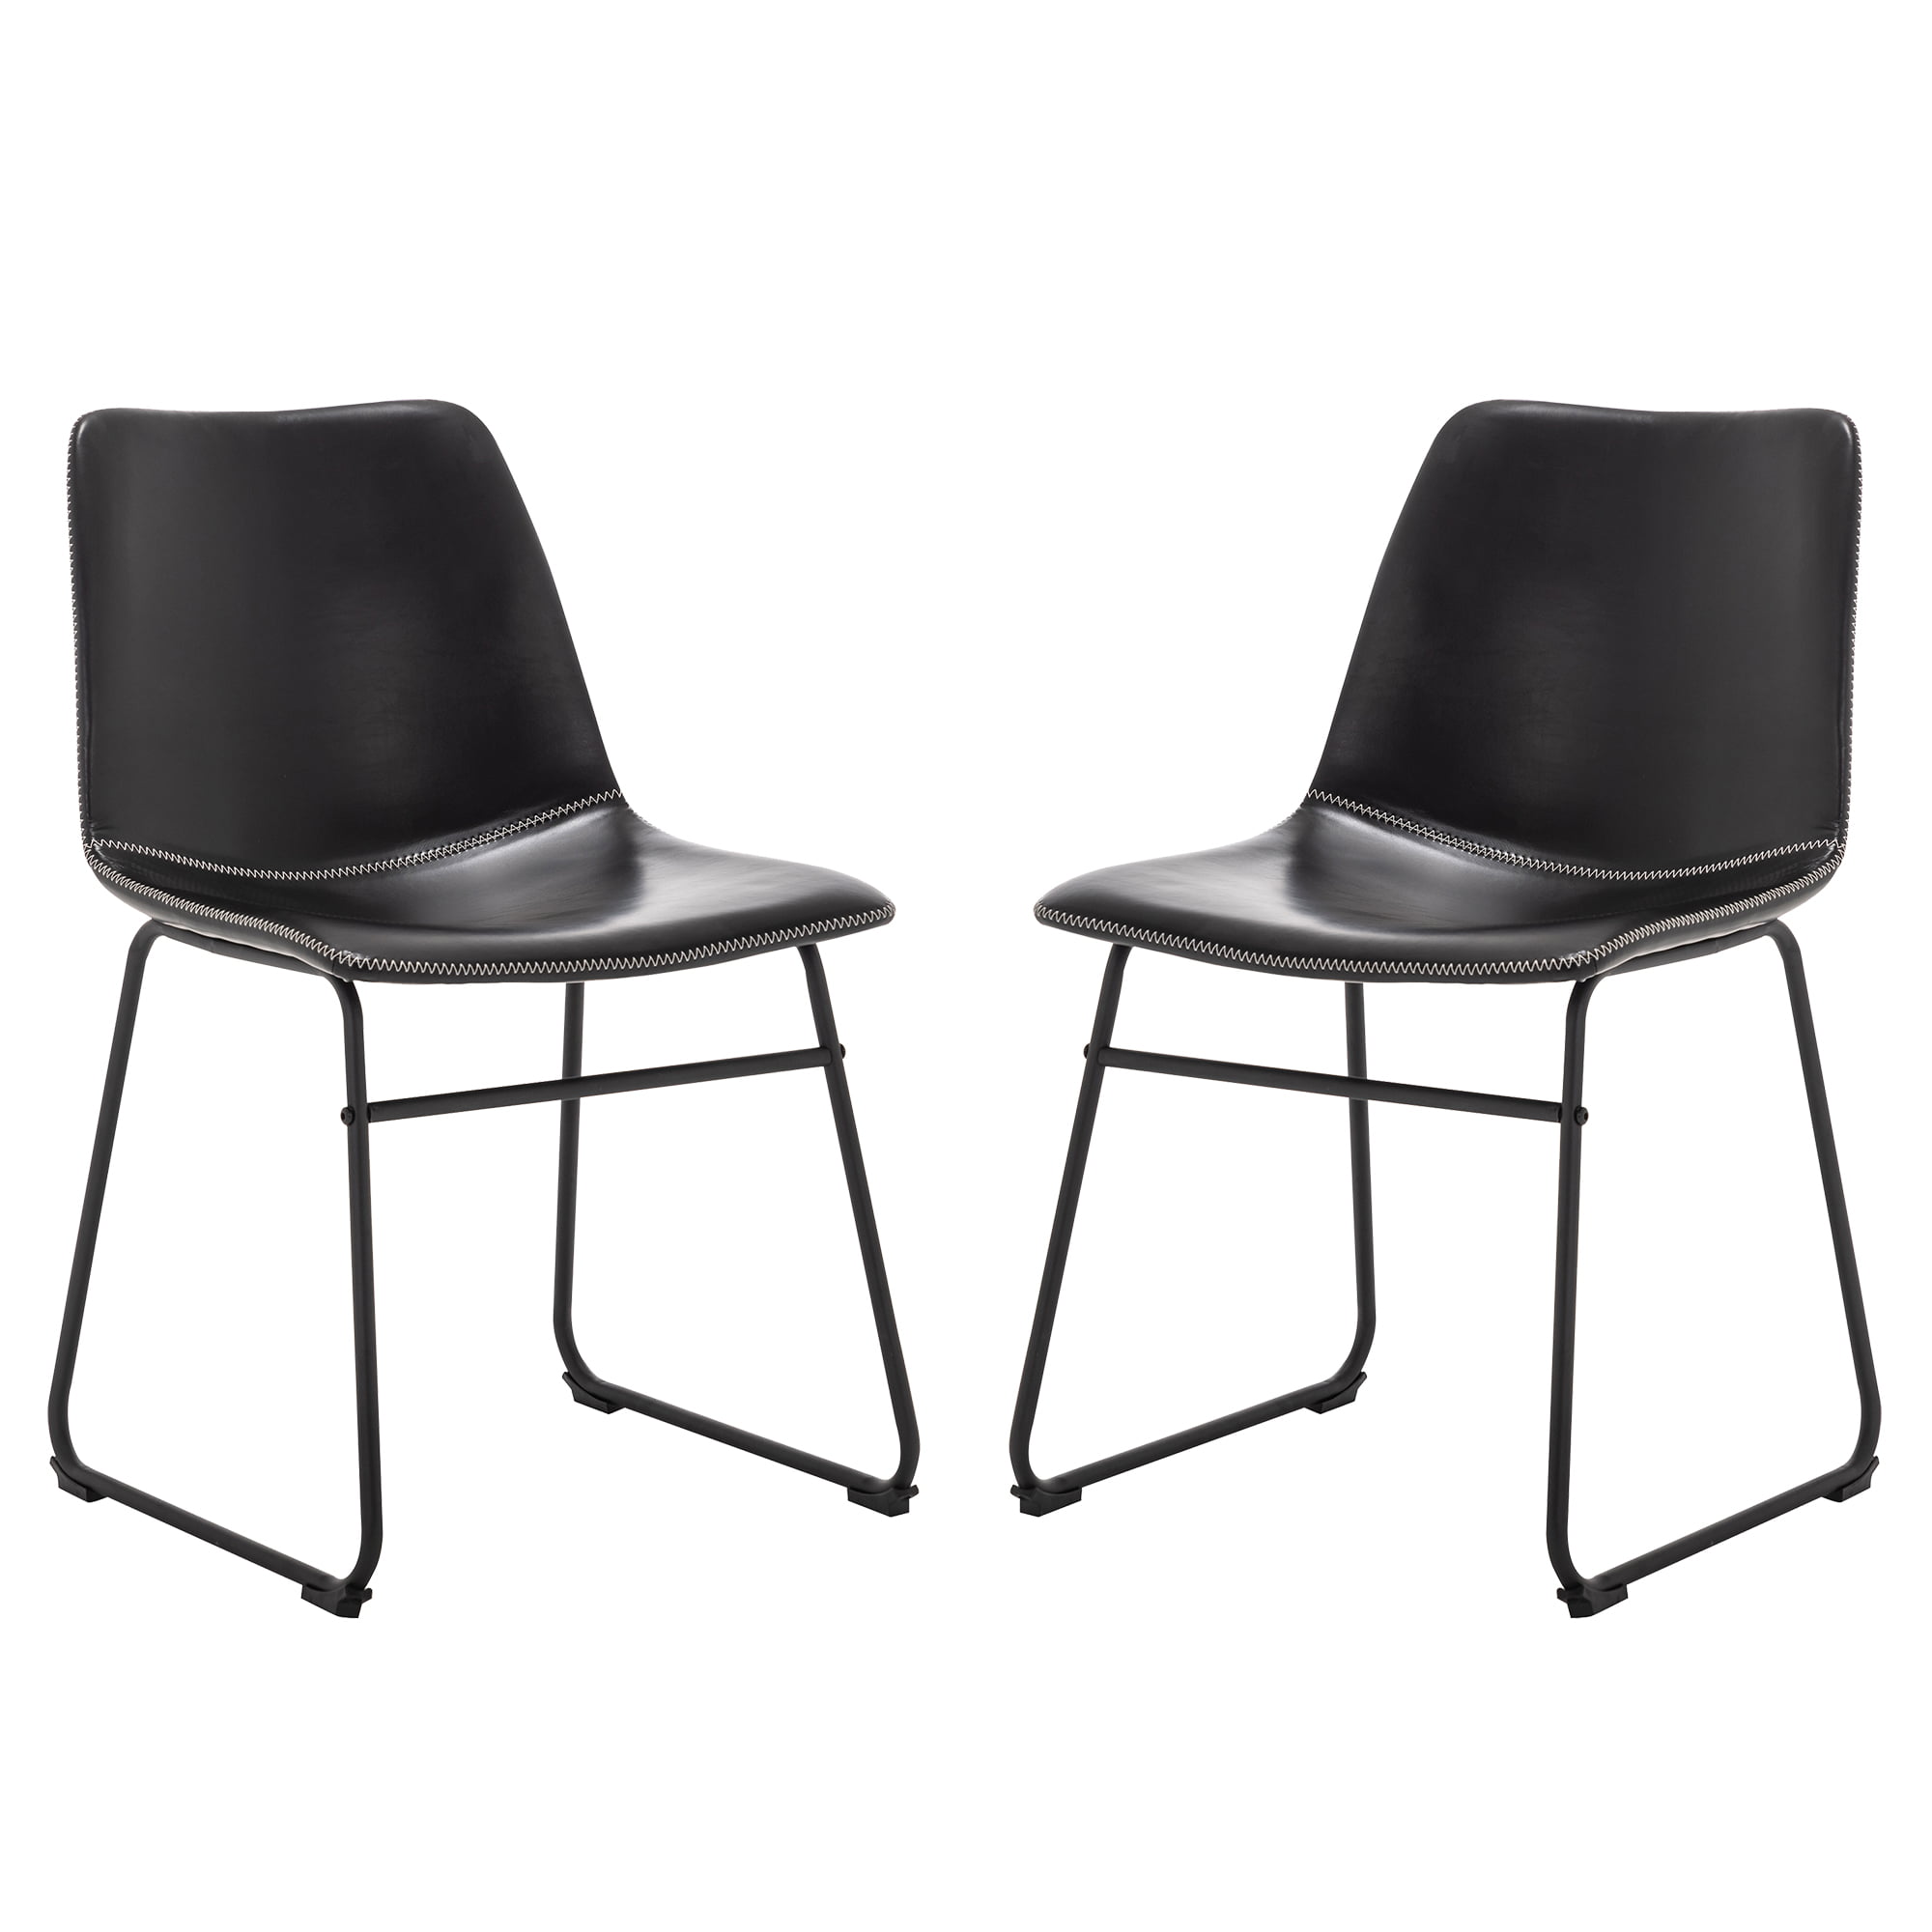 Belleze Set Of 2 Mid Century Faux Leather Upholstered Bucket Seat